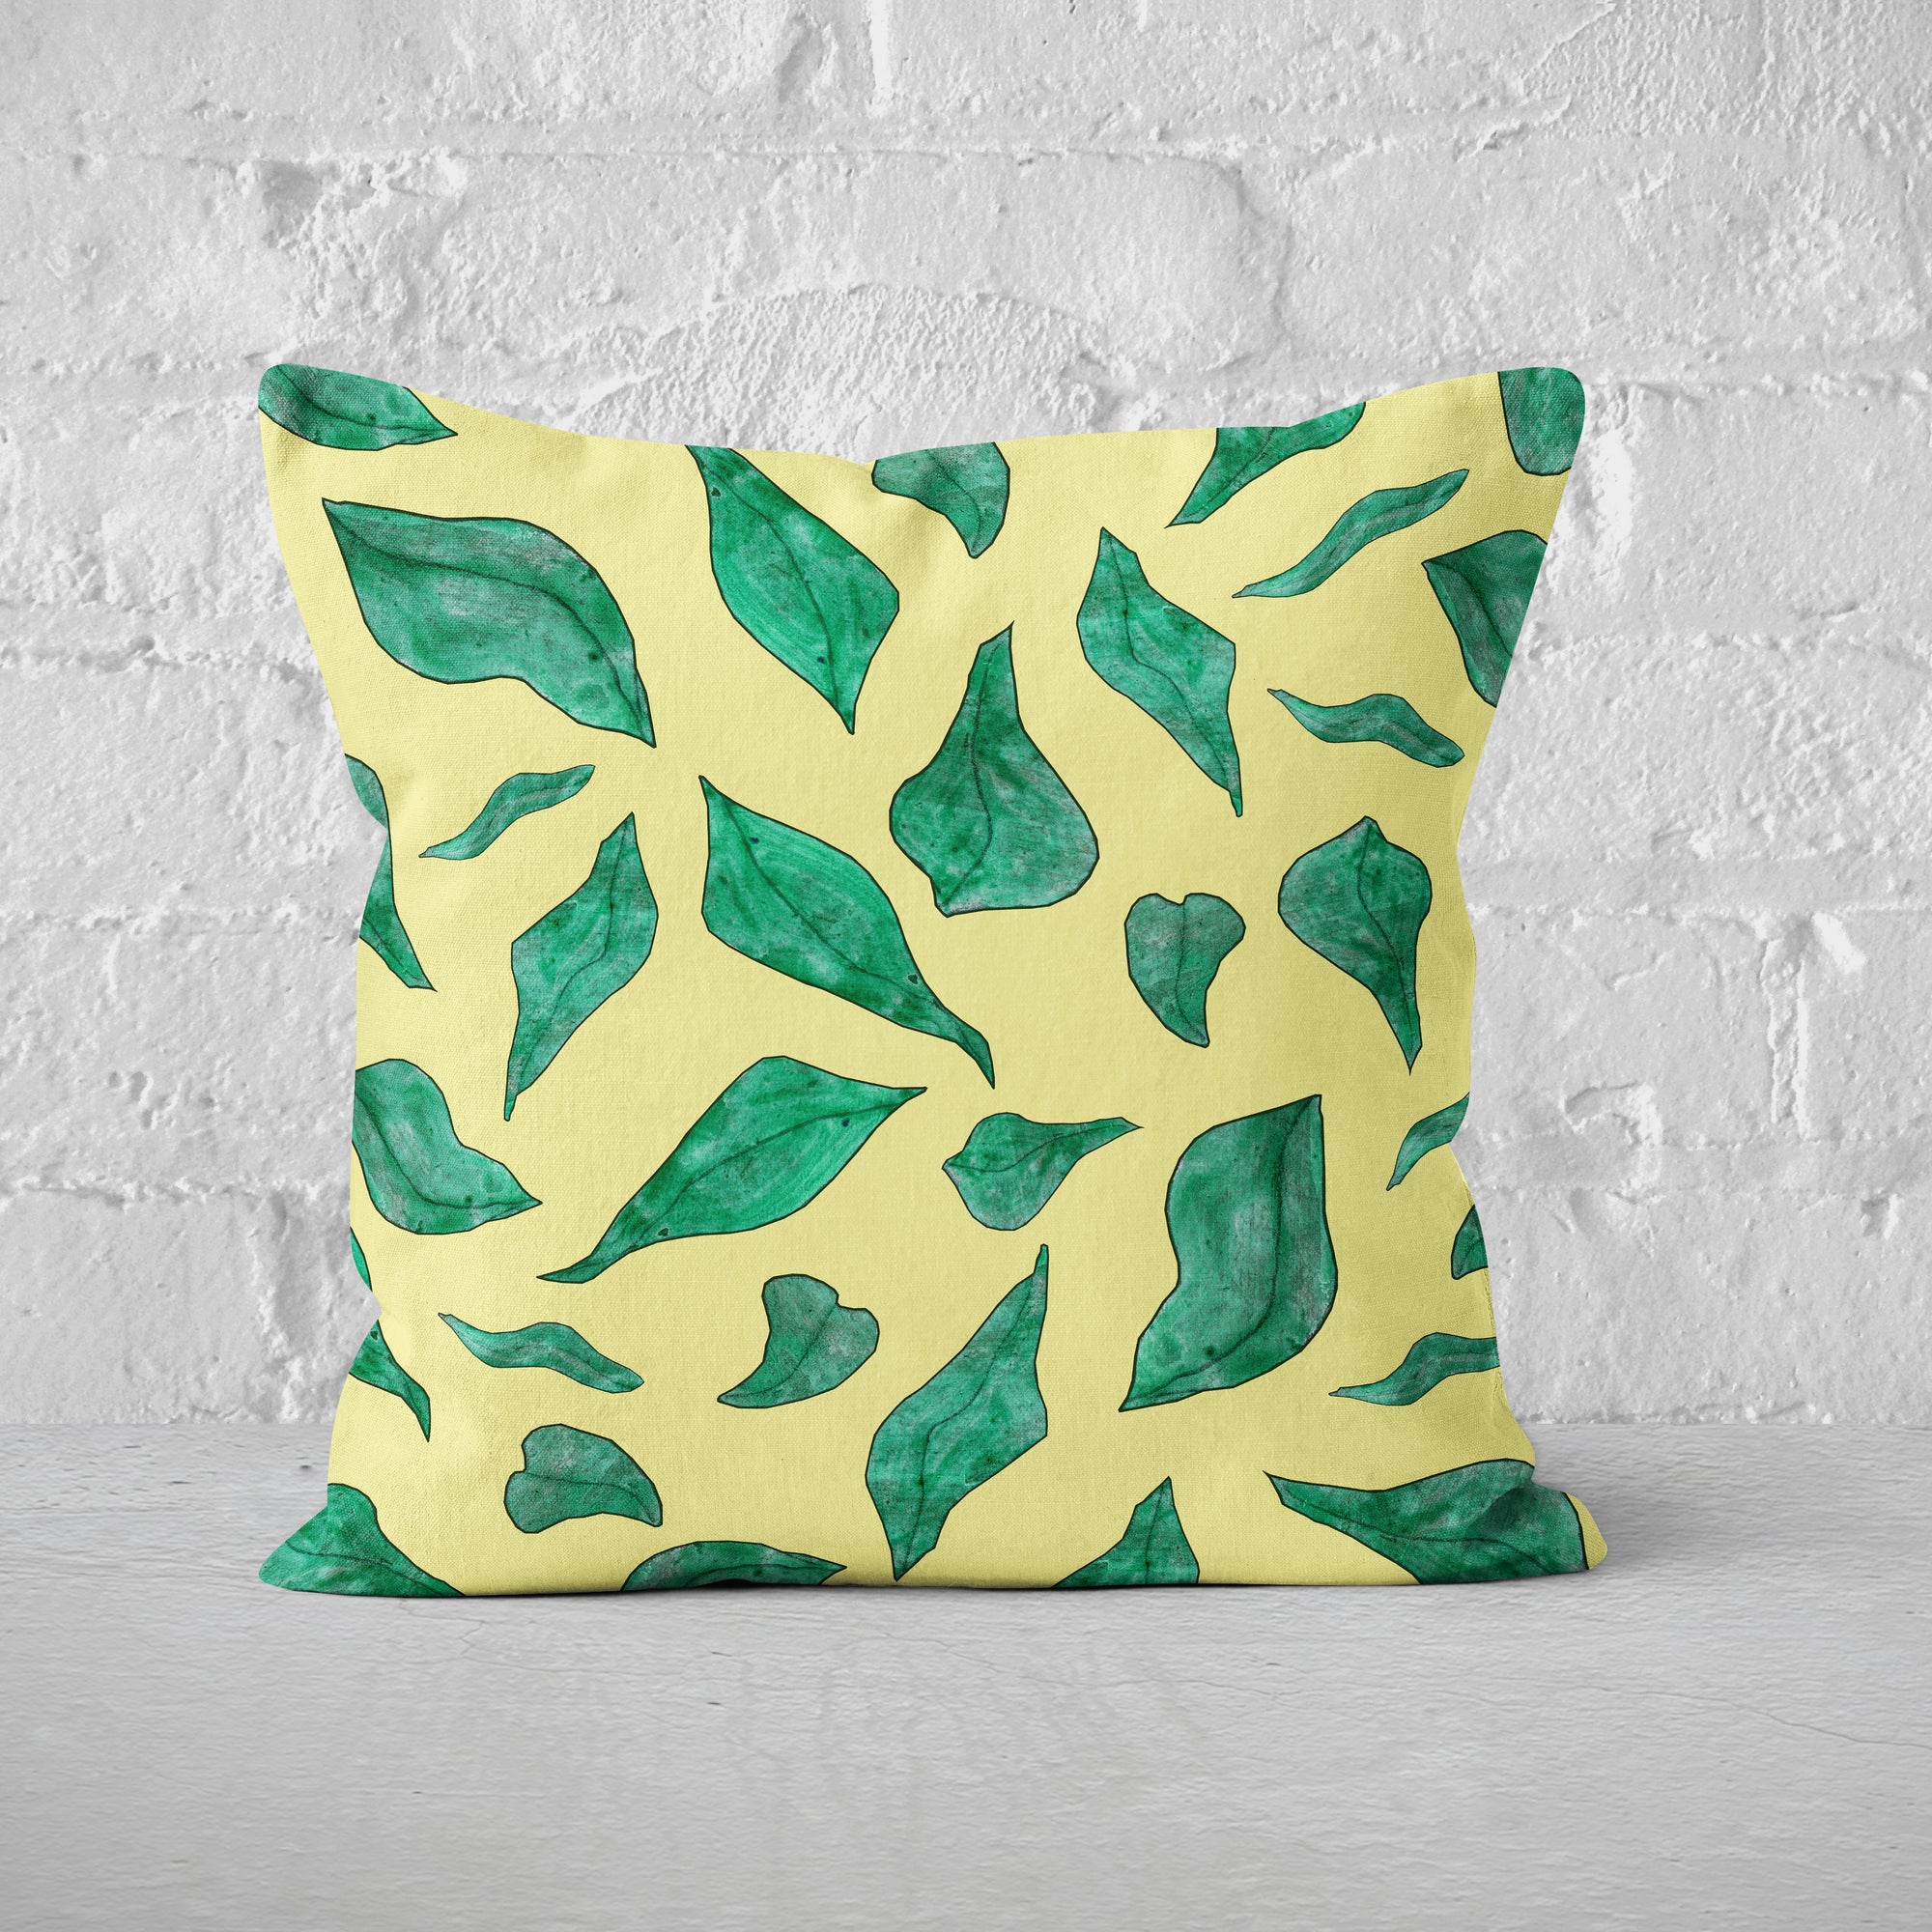 Pillow Cover Feature Art 'Fall' - Yellow - Cotton Twill